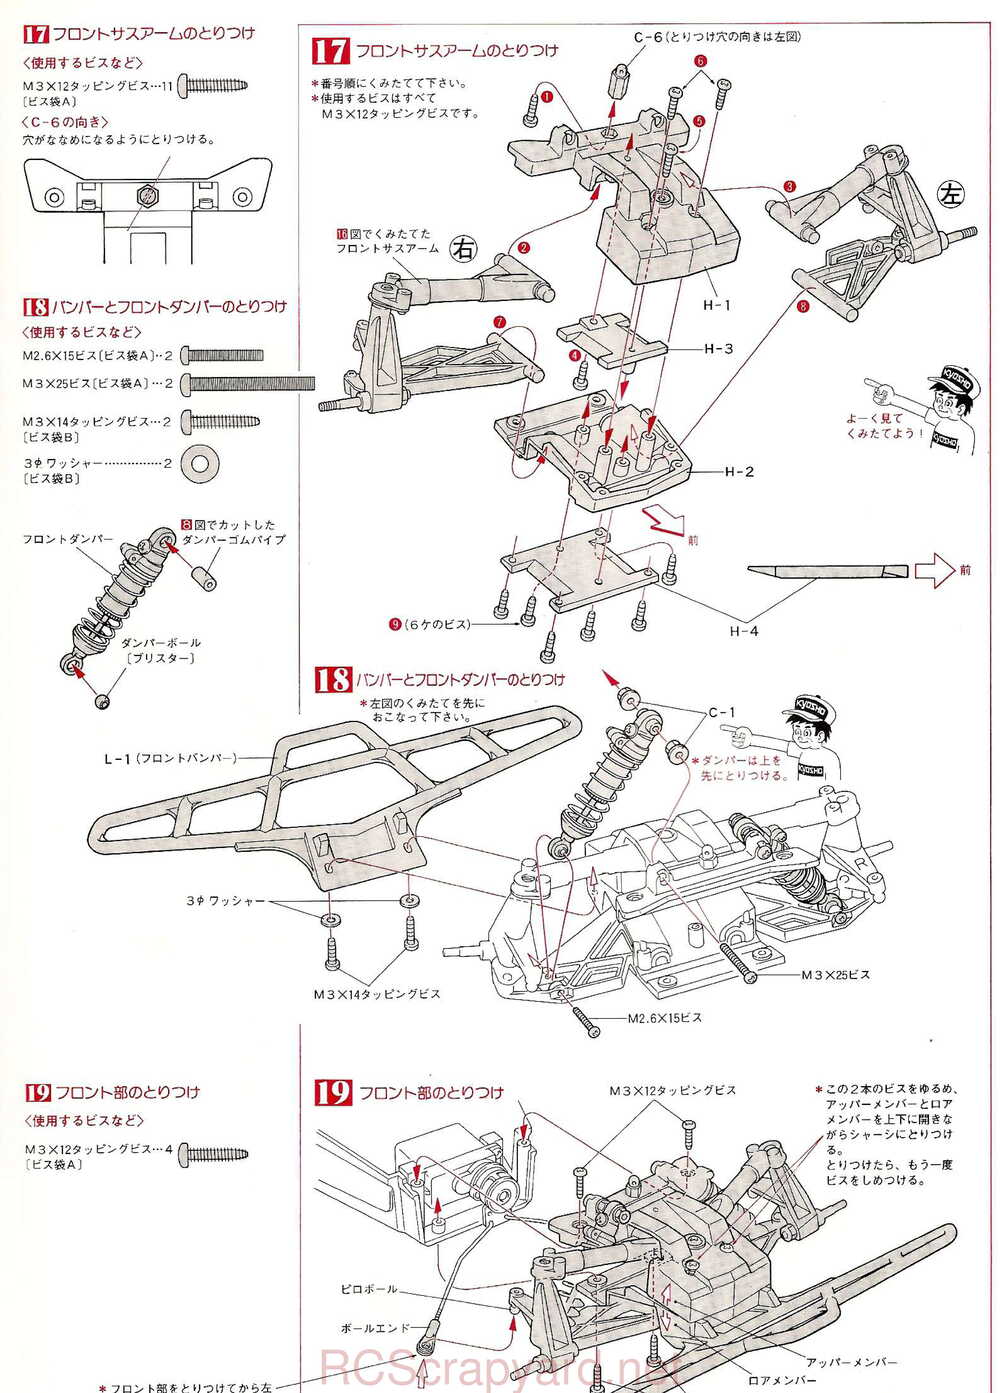 Kyosho - 3084 - Cosmo - Manual - Page 09